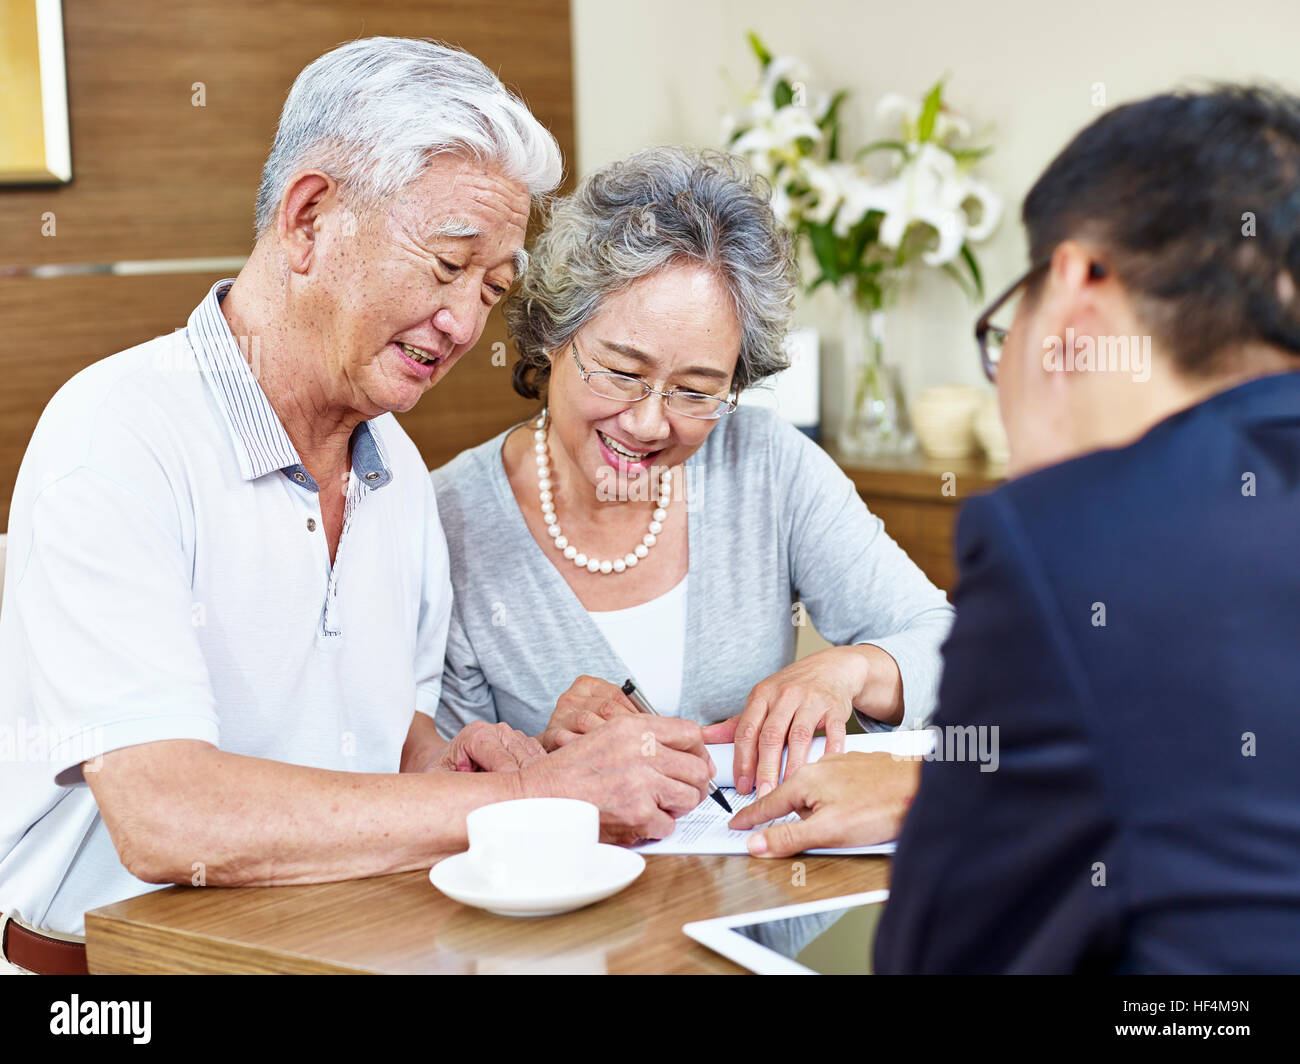 happy senior asian couple signing a contract agreement in front a salesperson. Stock Photo